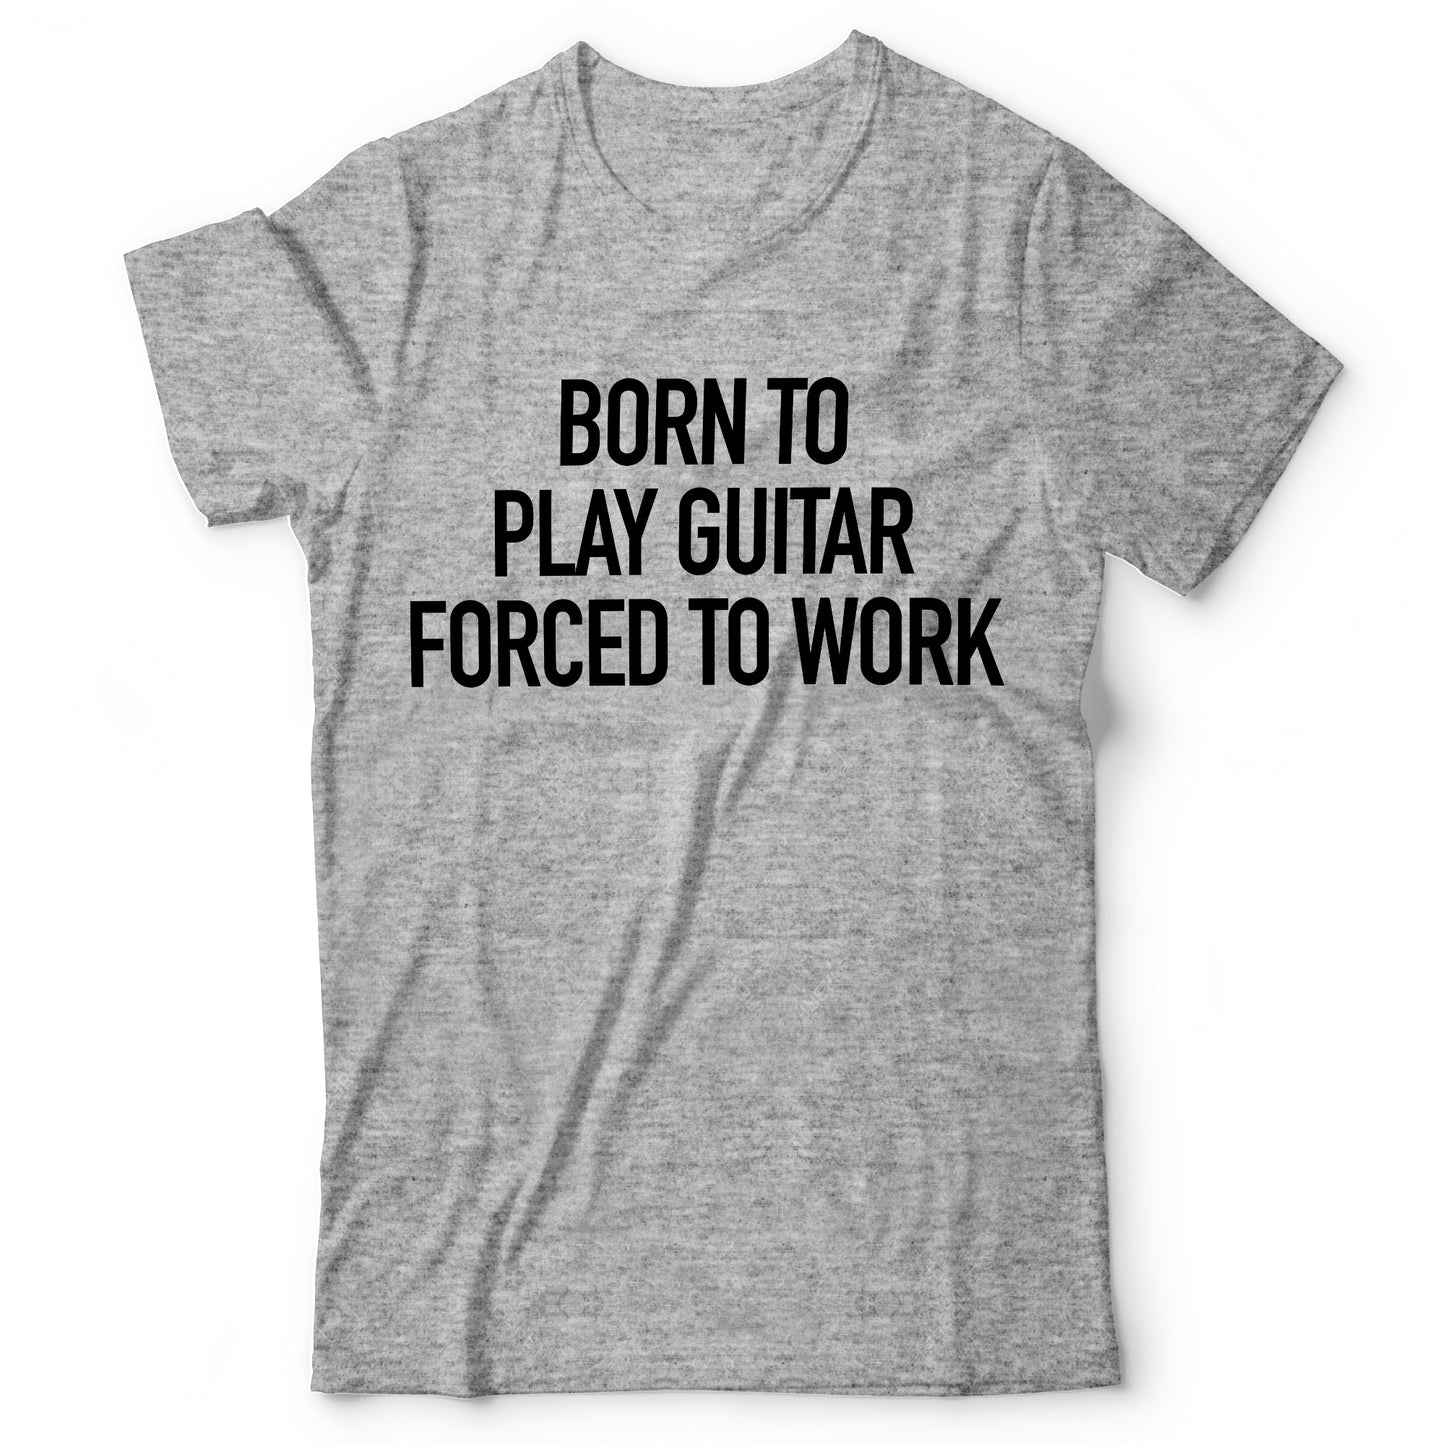 Born To Play Forced to Work - T-shirt